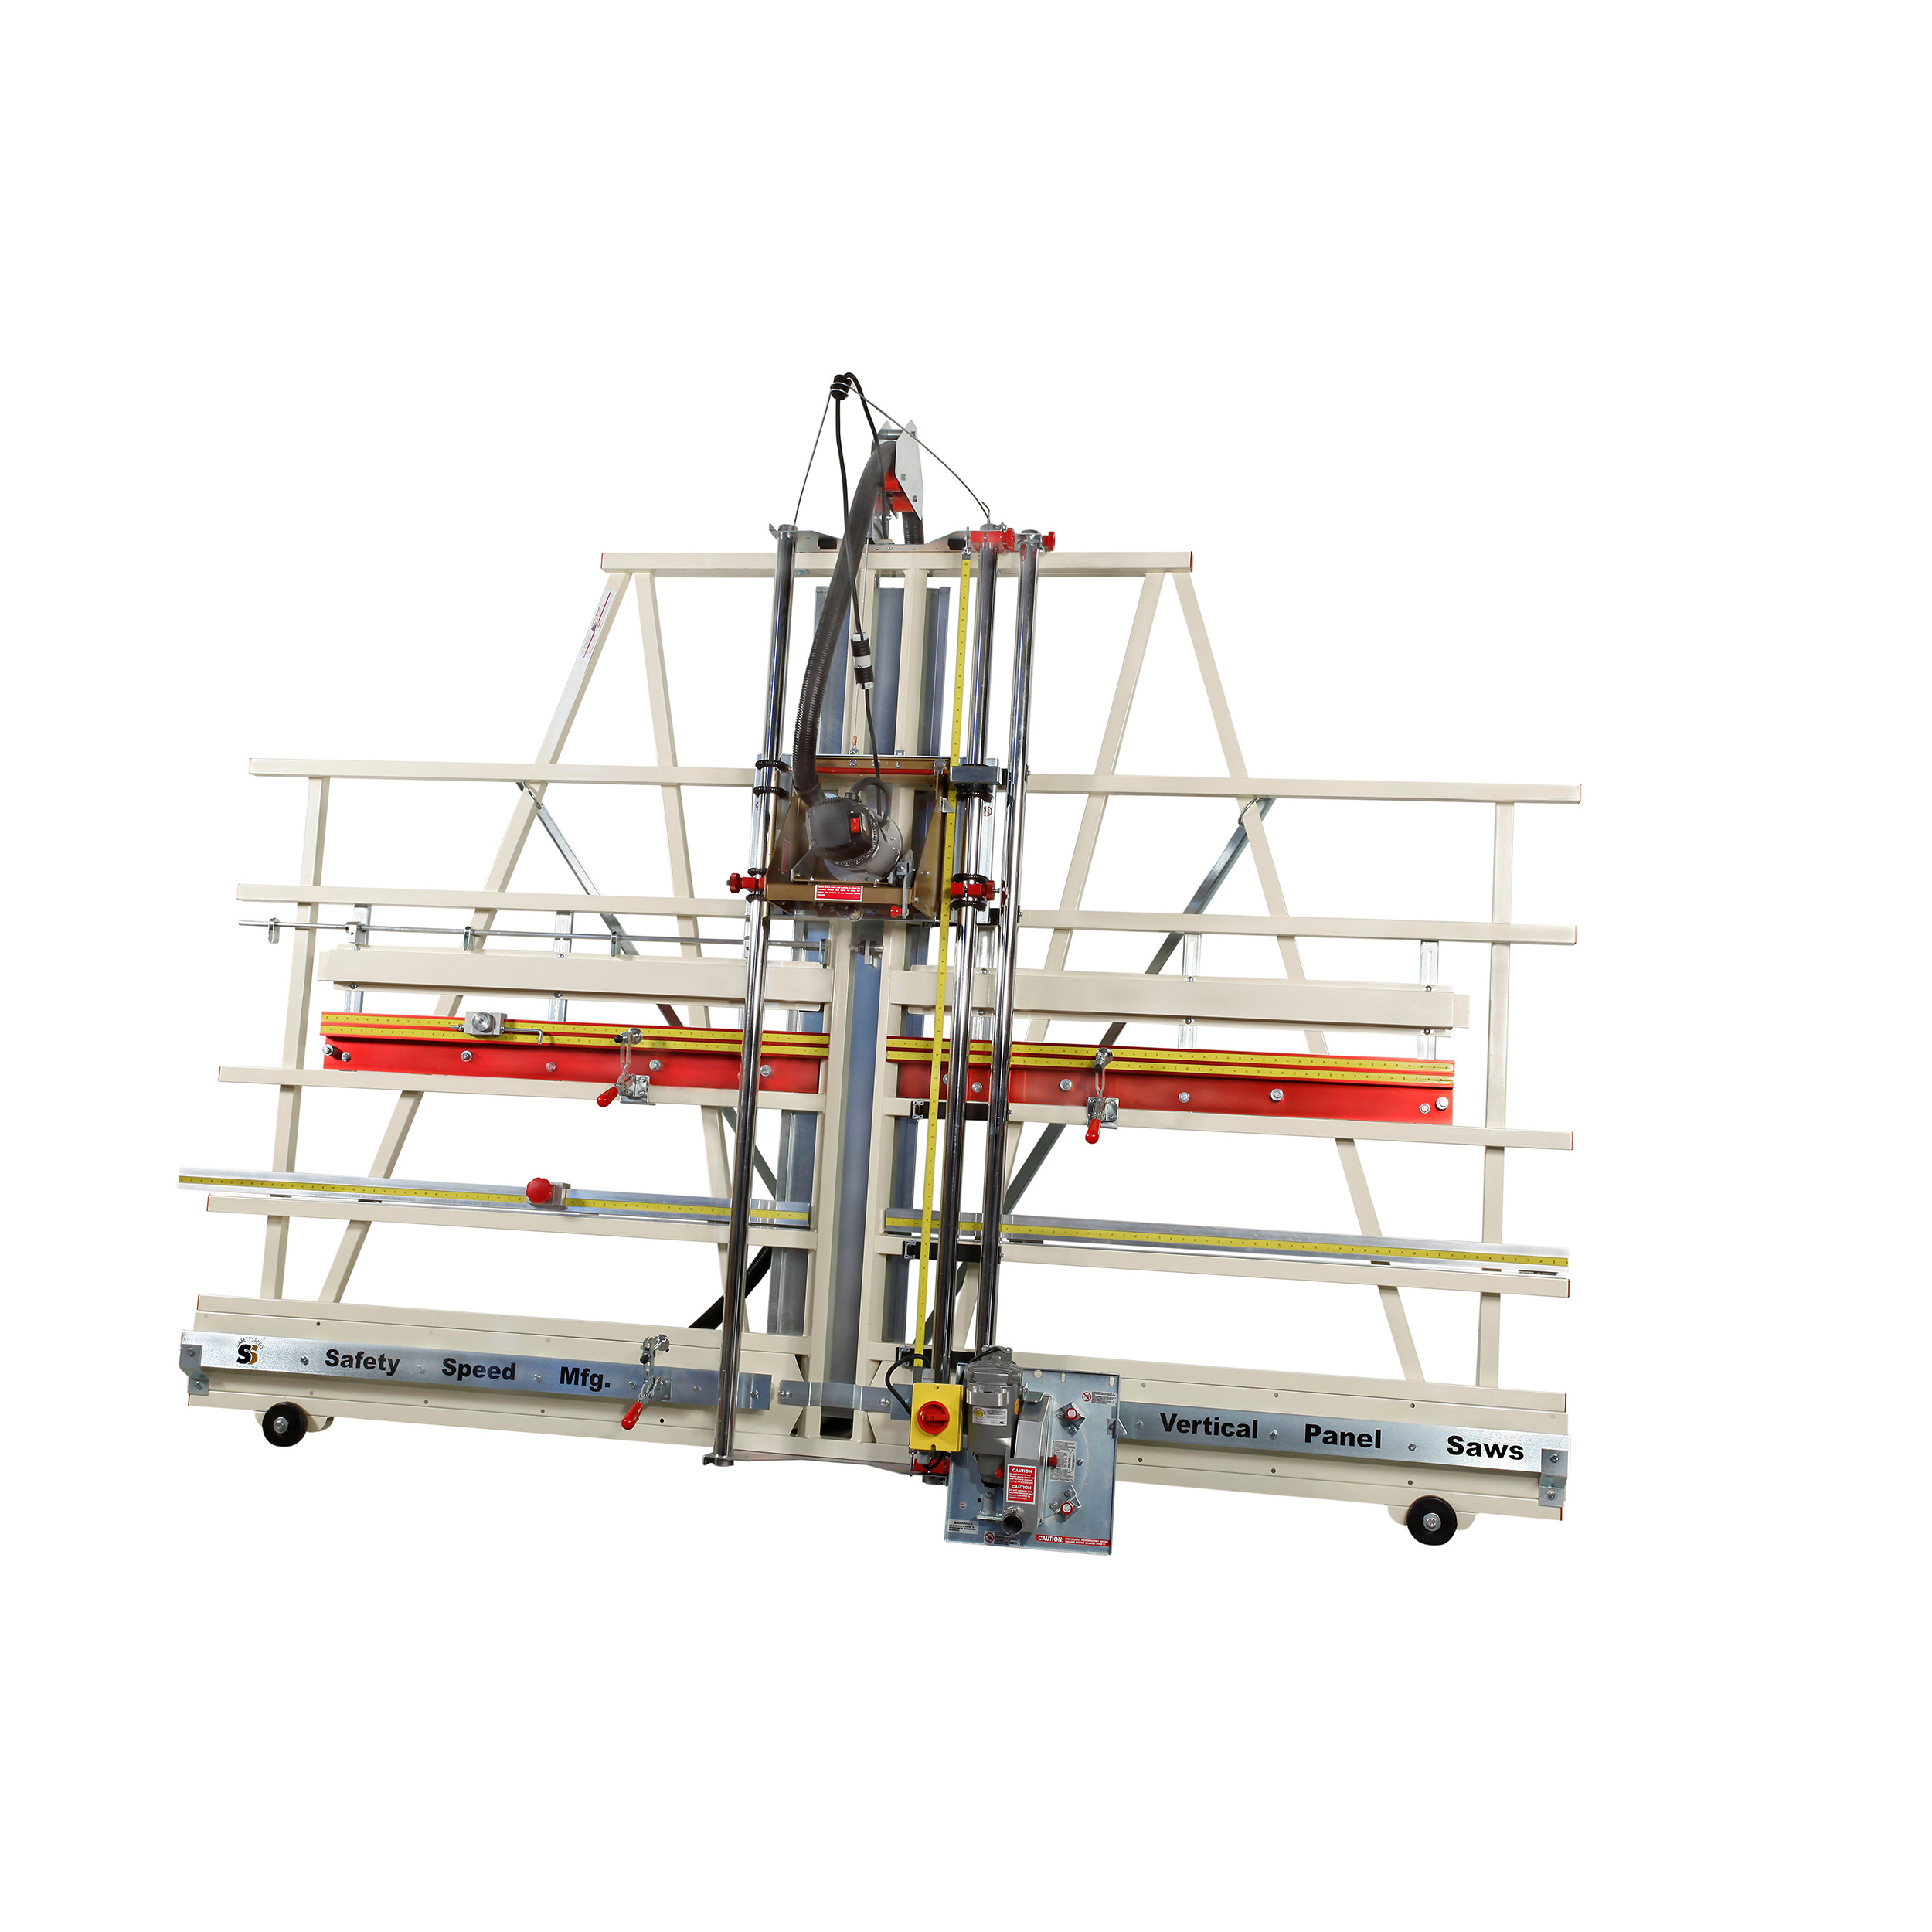 Safety Speed Sr5u Vertical Panel Saw/router